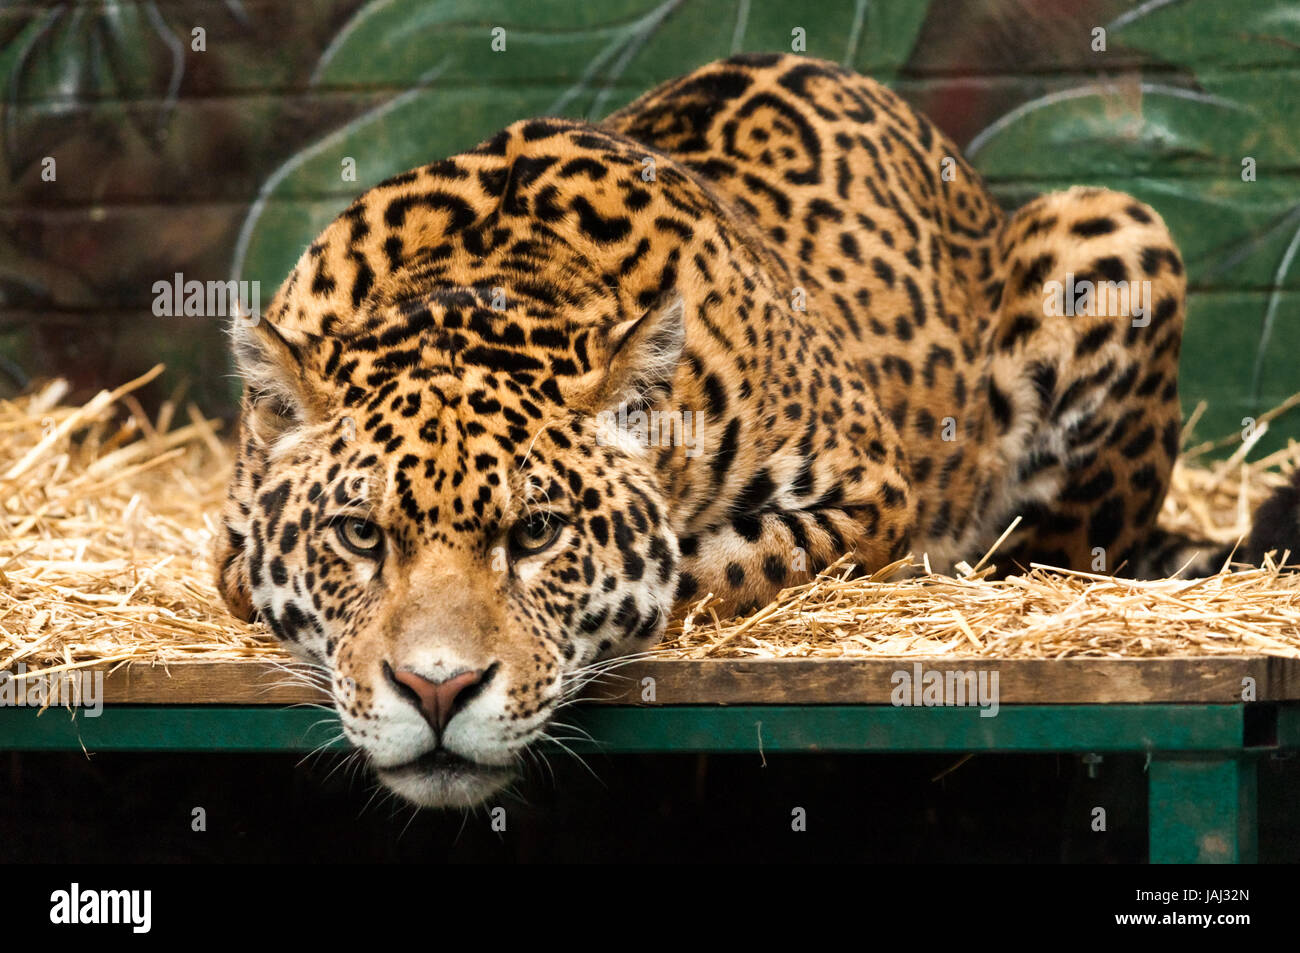 Leopard getting ready to pounce Stock Photo